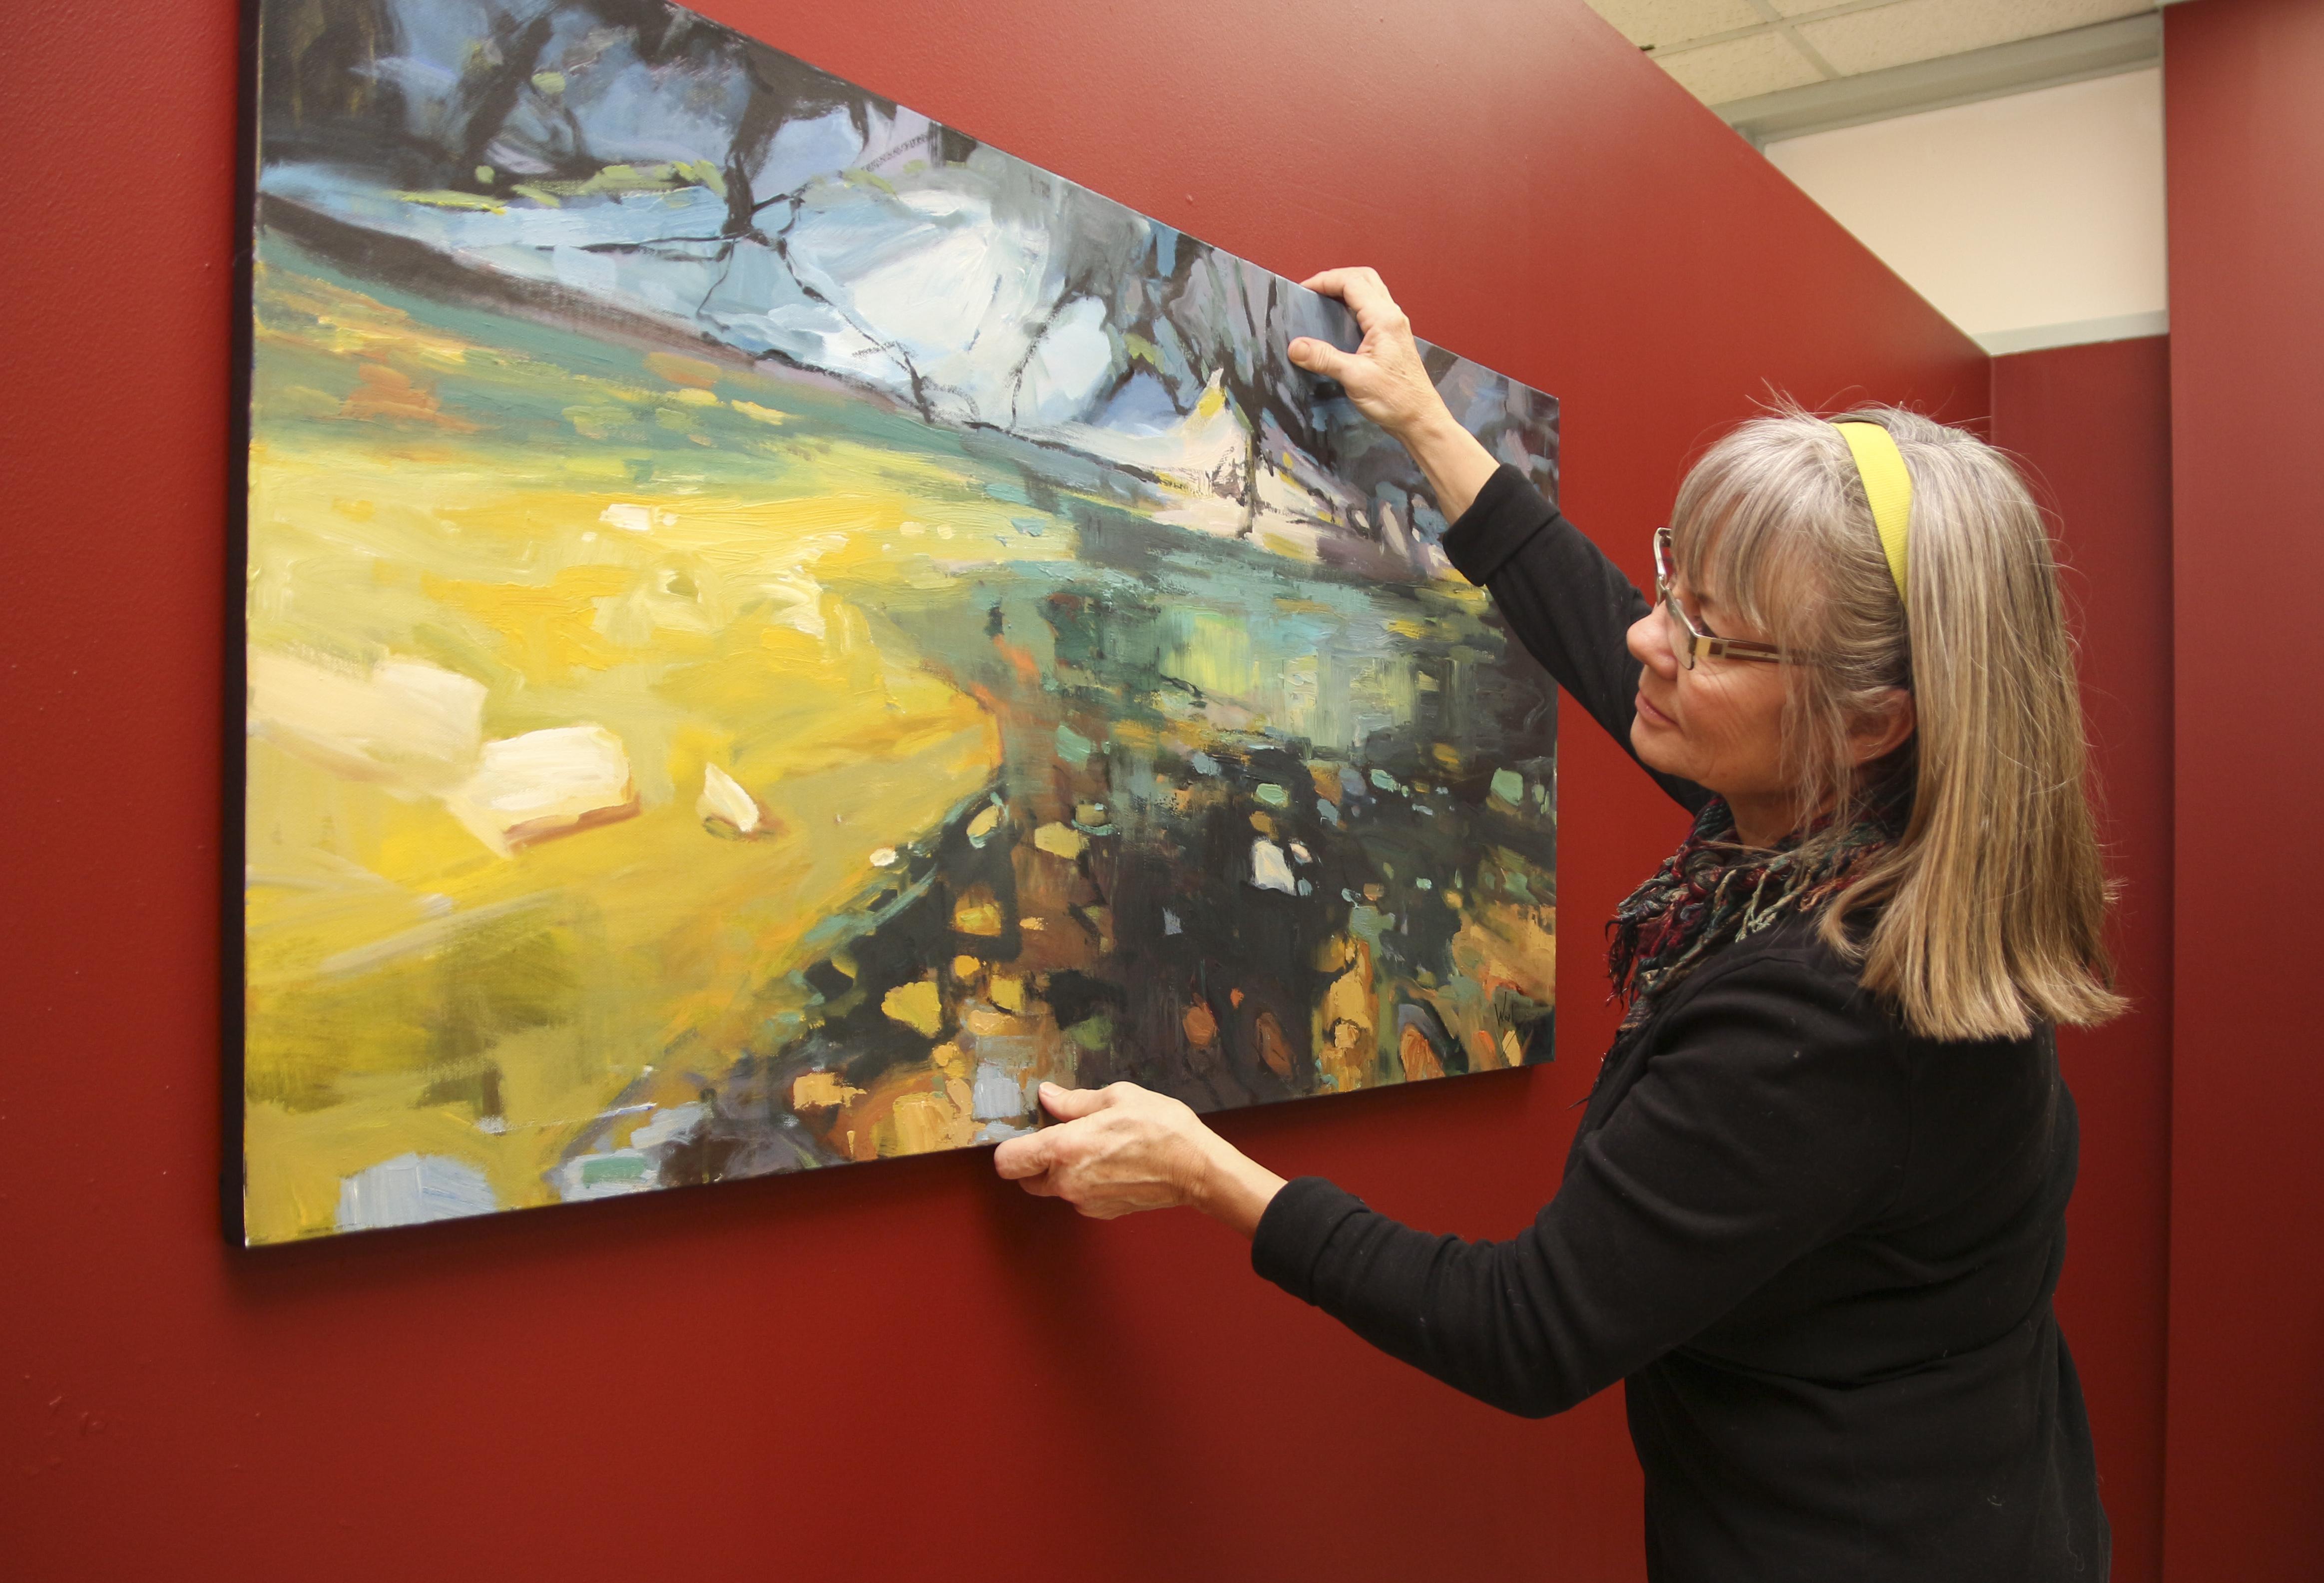 GETTING READY – Local professional artist Susan Woolgar adjusts one of her paintings as she displays her work in the Viewpoint Gallery